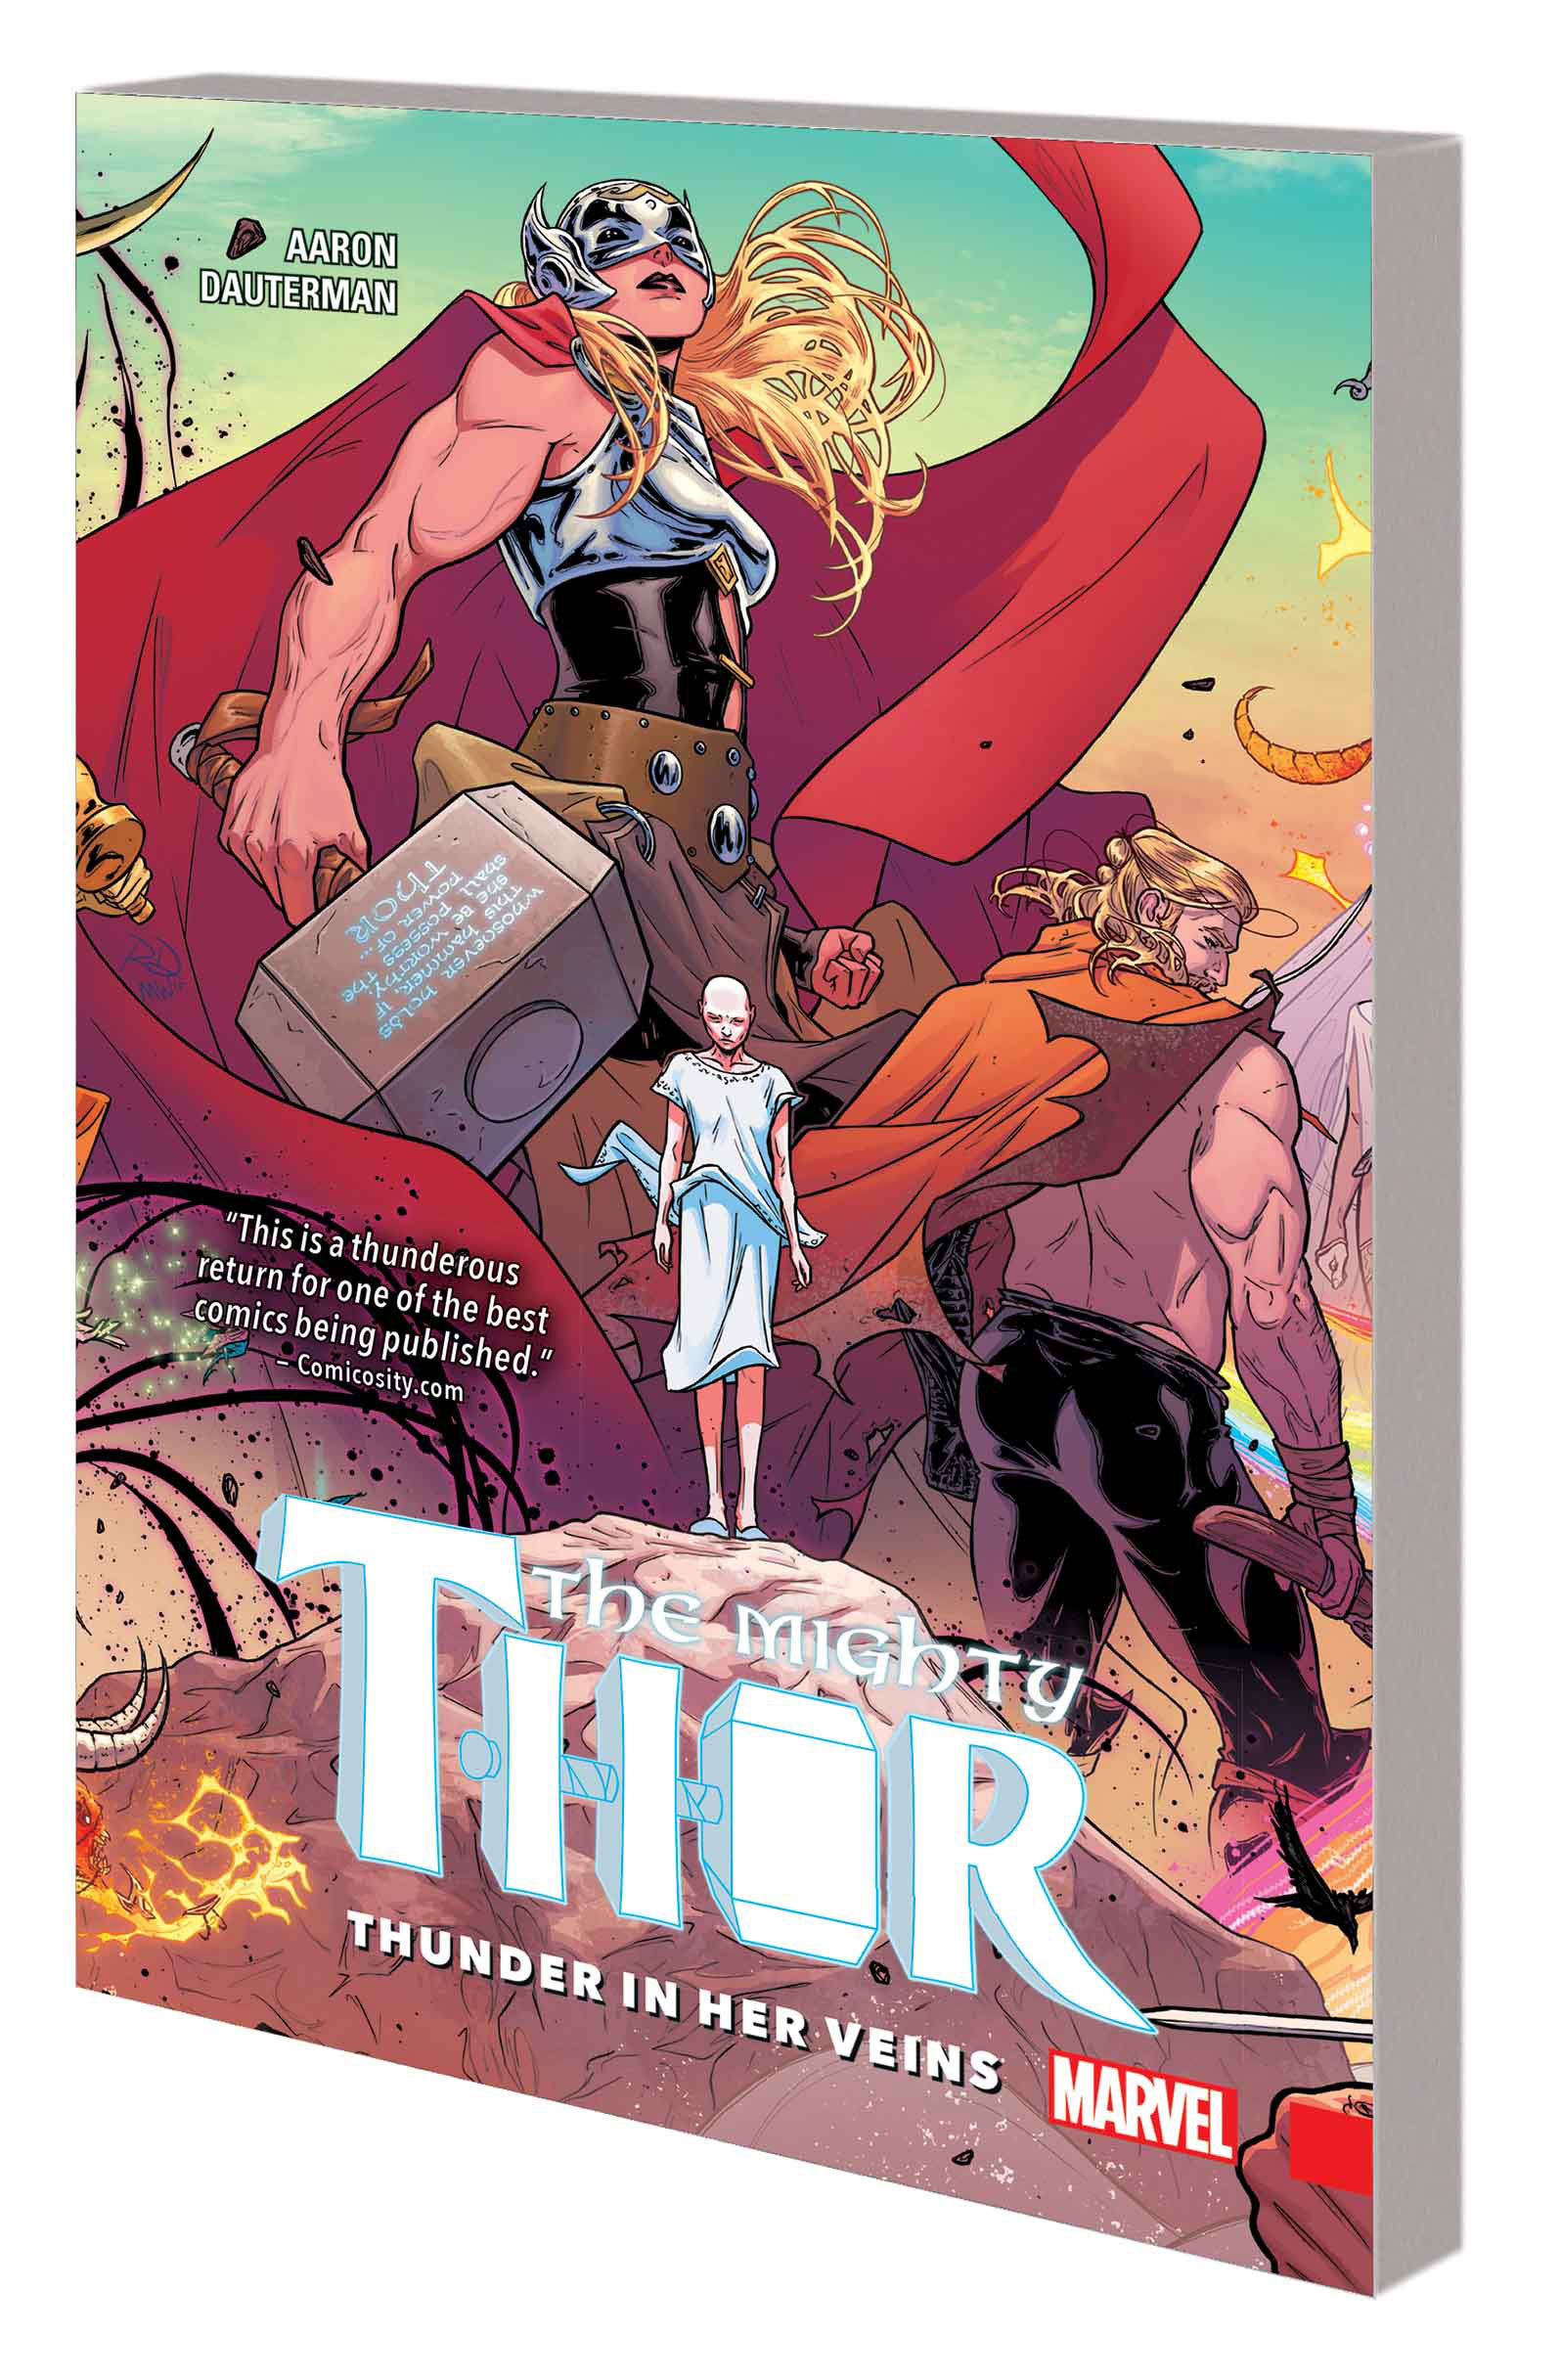 THE MIGHTY THOR VOL. 1: THUNDER IN HER VEINS TPB